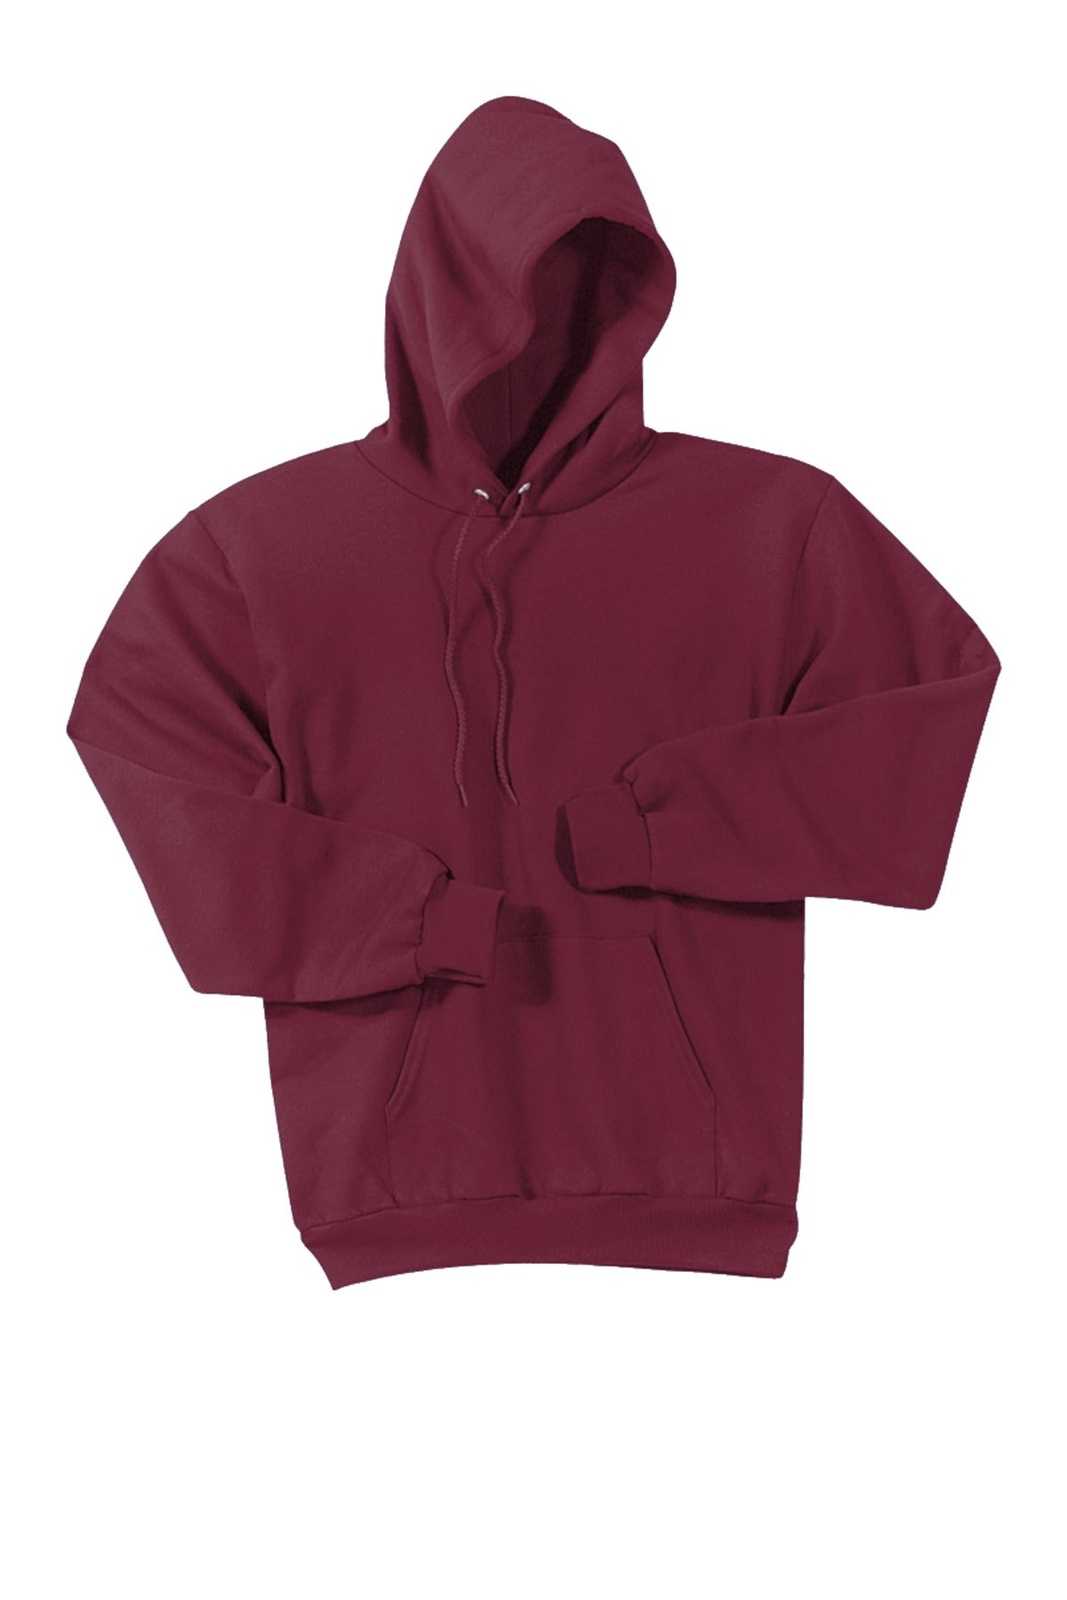 Port &amp; Company PC90H Essential Fleece Pullover Hooded Sweatshirt - Cardinal - HIT a Double - 5